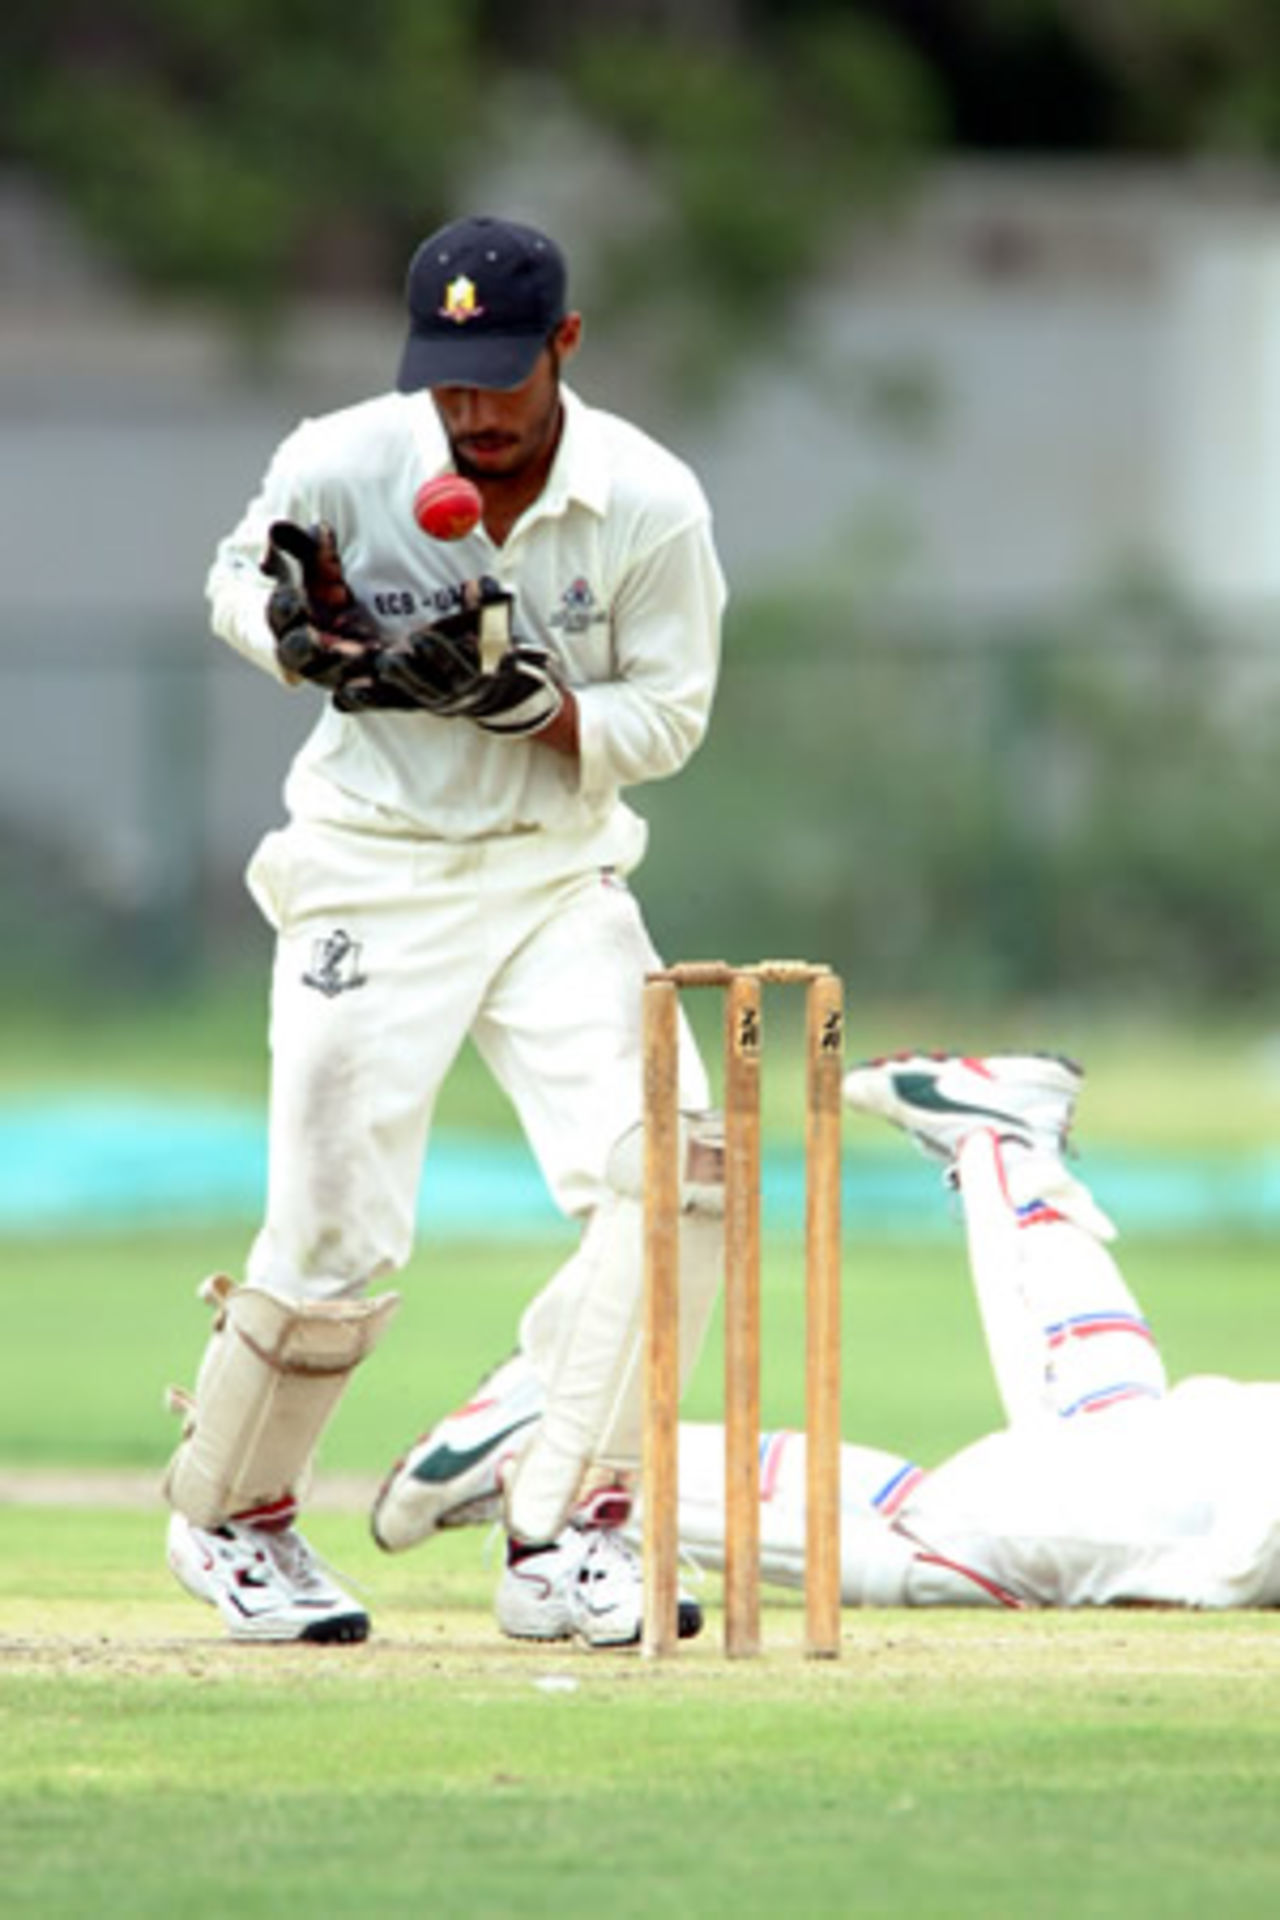 Abdul Rehman of UAE collects a ball, Maldives Under-19s v United Arab Emirates Under-19s at PCB Academy Ground Karachi, Youth Asia Cup 2003, 22 July 2003.